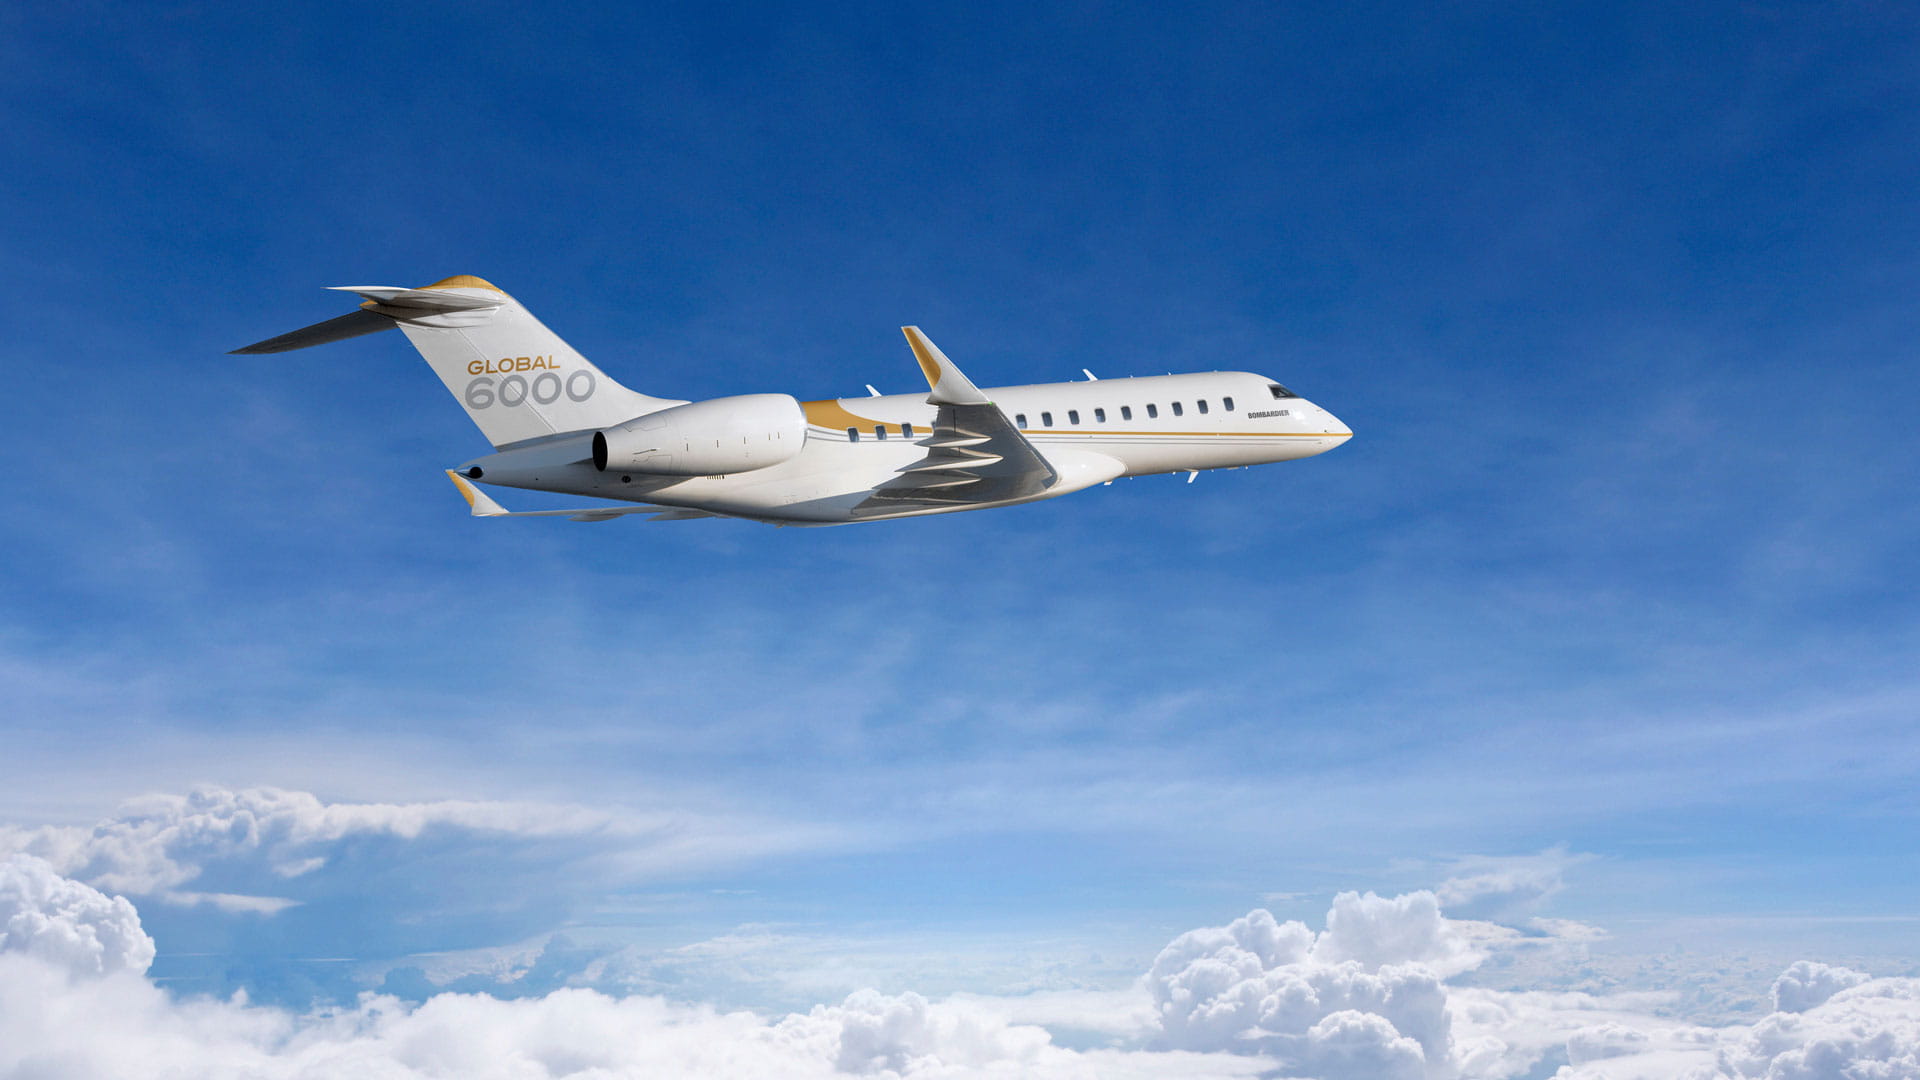 Bombardier Global Express Wallpapers